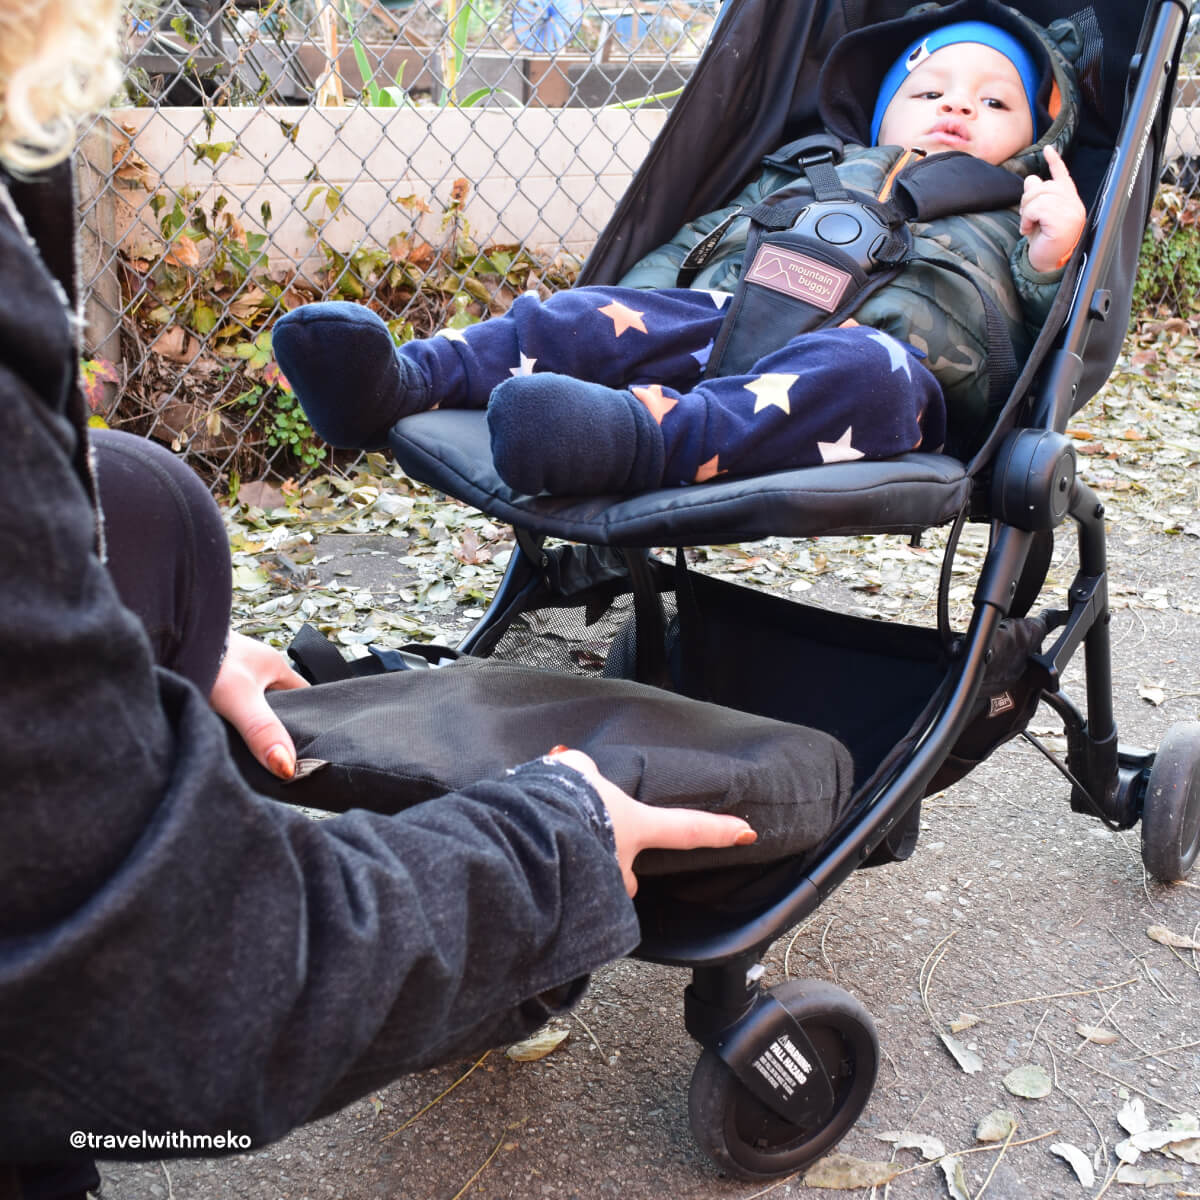 A Red Dot award winning designworld class in safety, stability and materialssuperior manoeuvrability and kerb popincredibly affordableluxury seat right from newborn